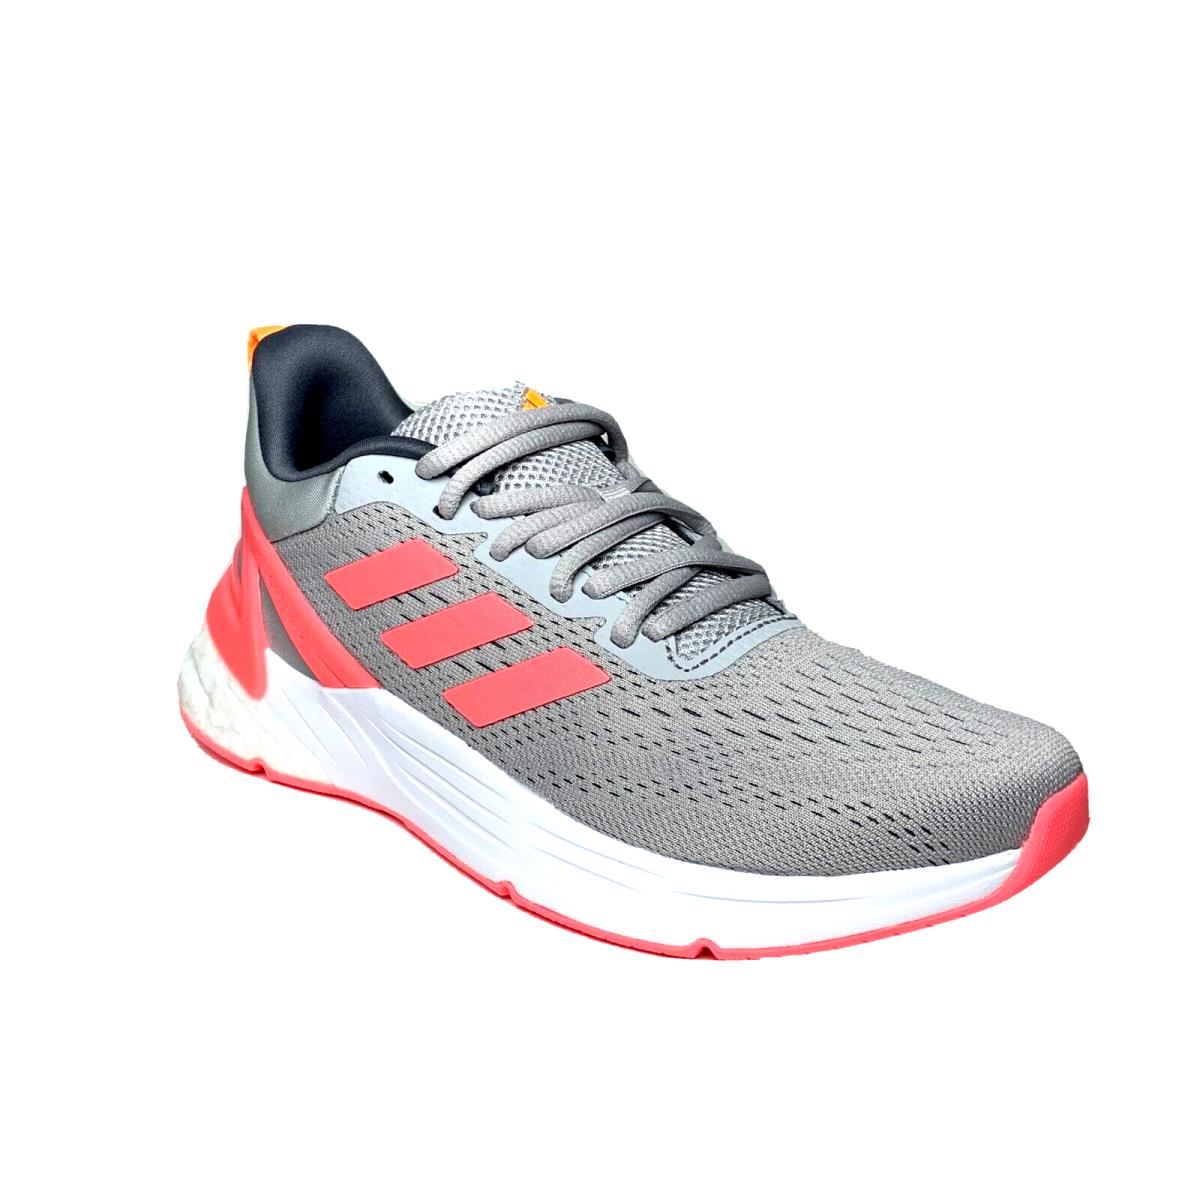 Adidas Womens Response Super 2 Unisex Athletic Shoes Running Sneakers Grey/pink